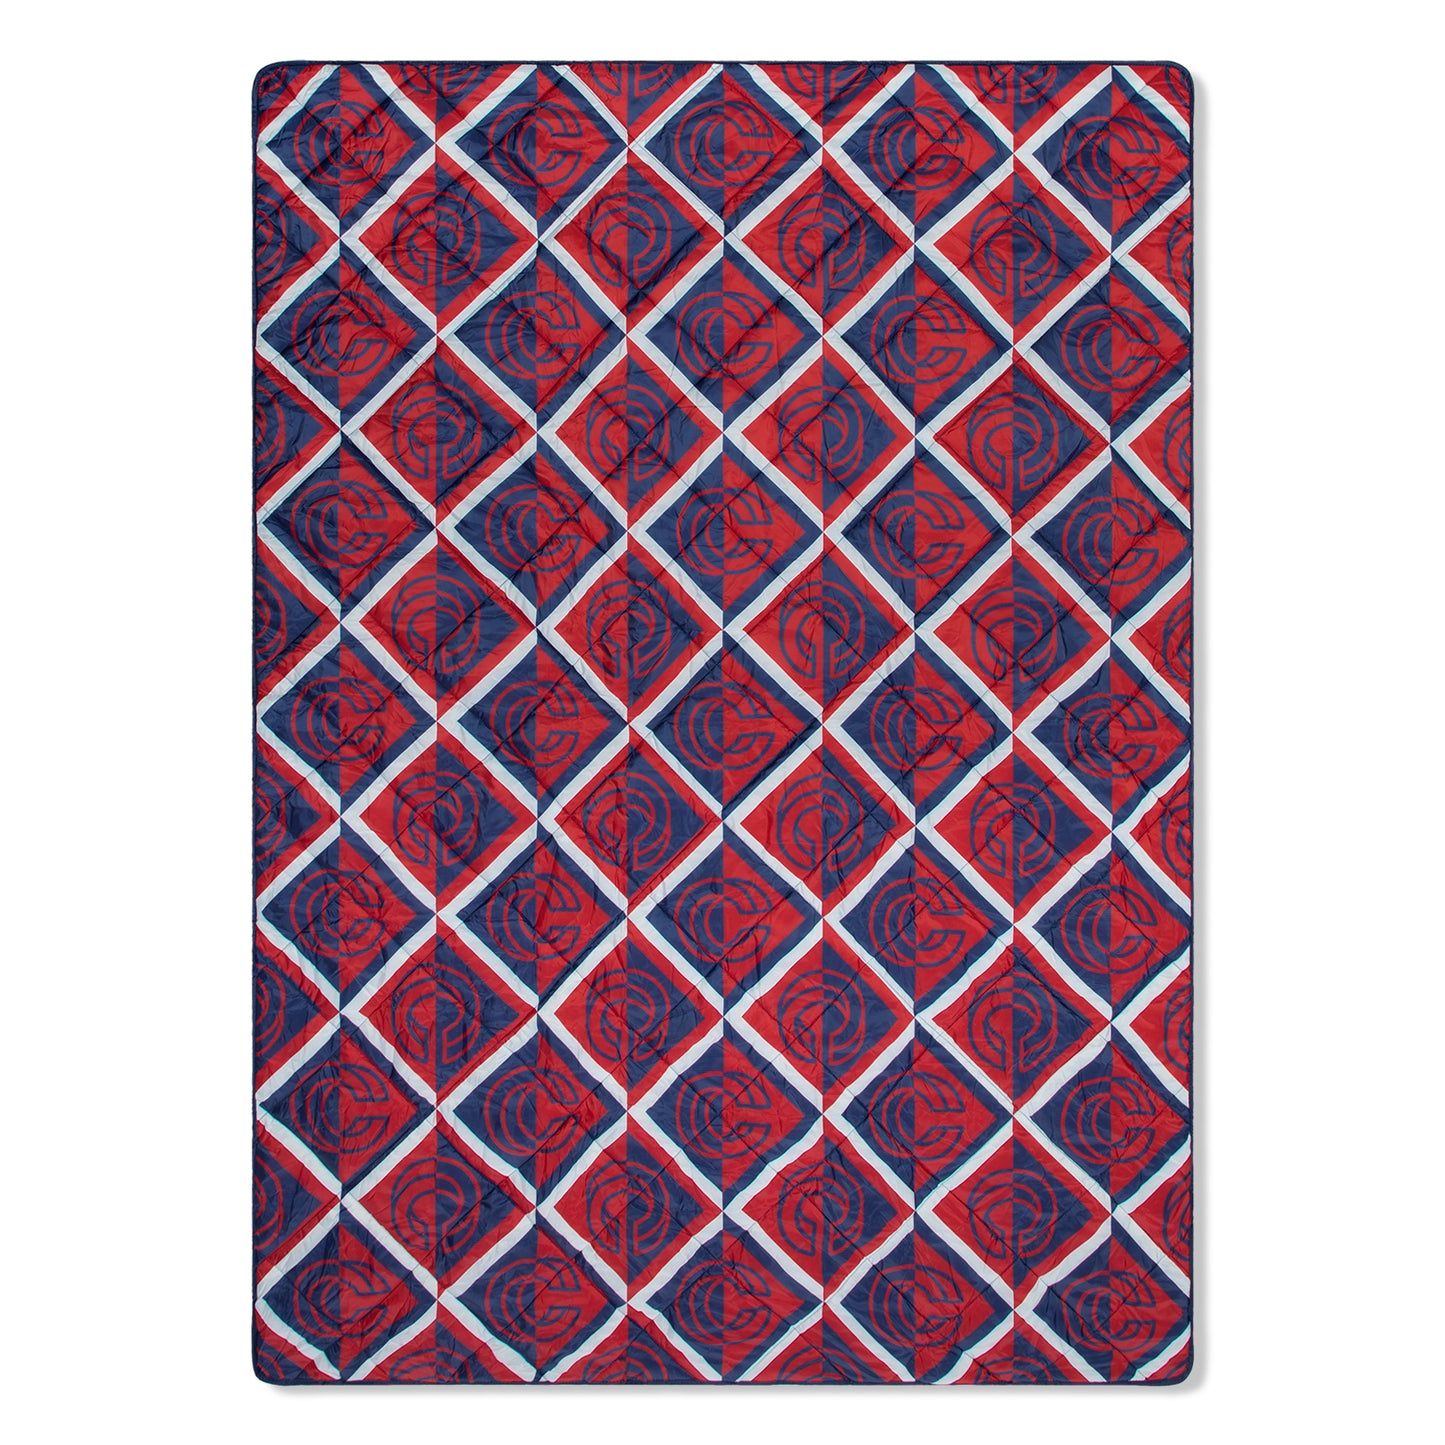 Concepts Almas Quilted Puffer Blanket (Navy/Red/White)